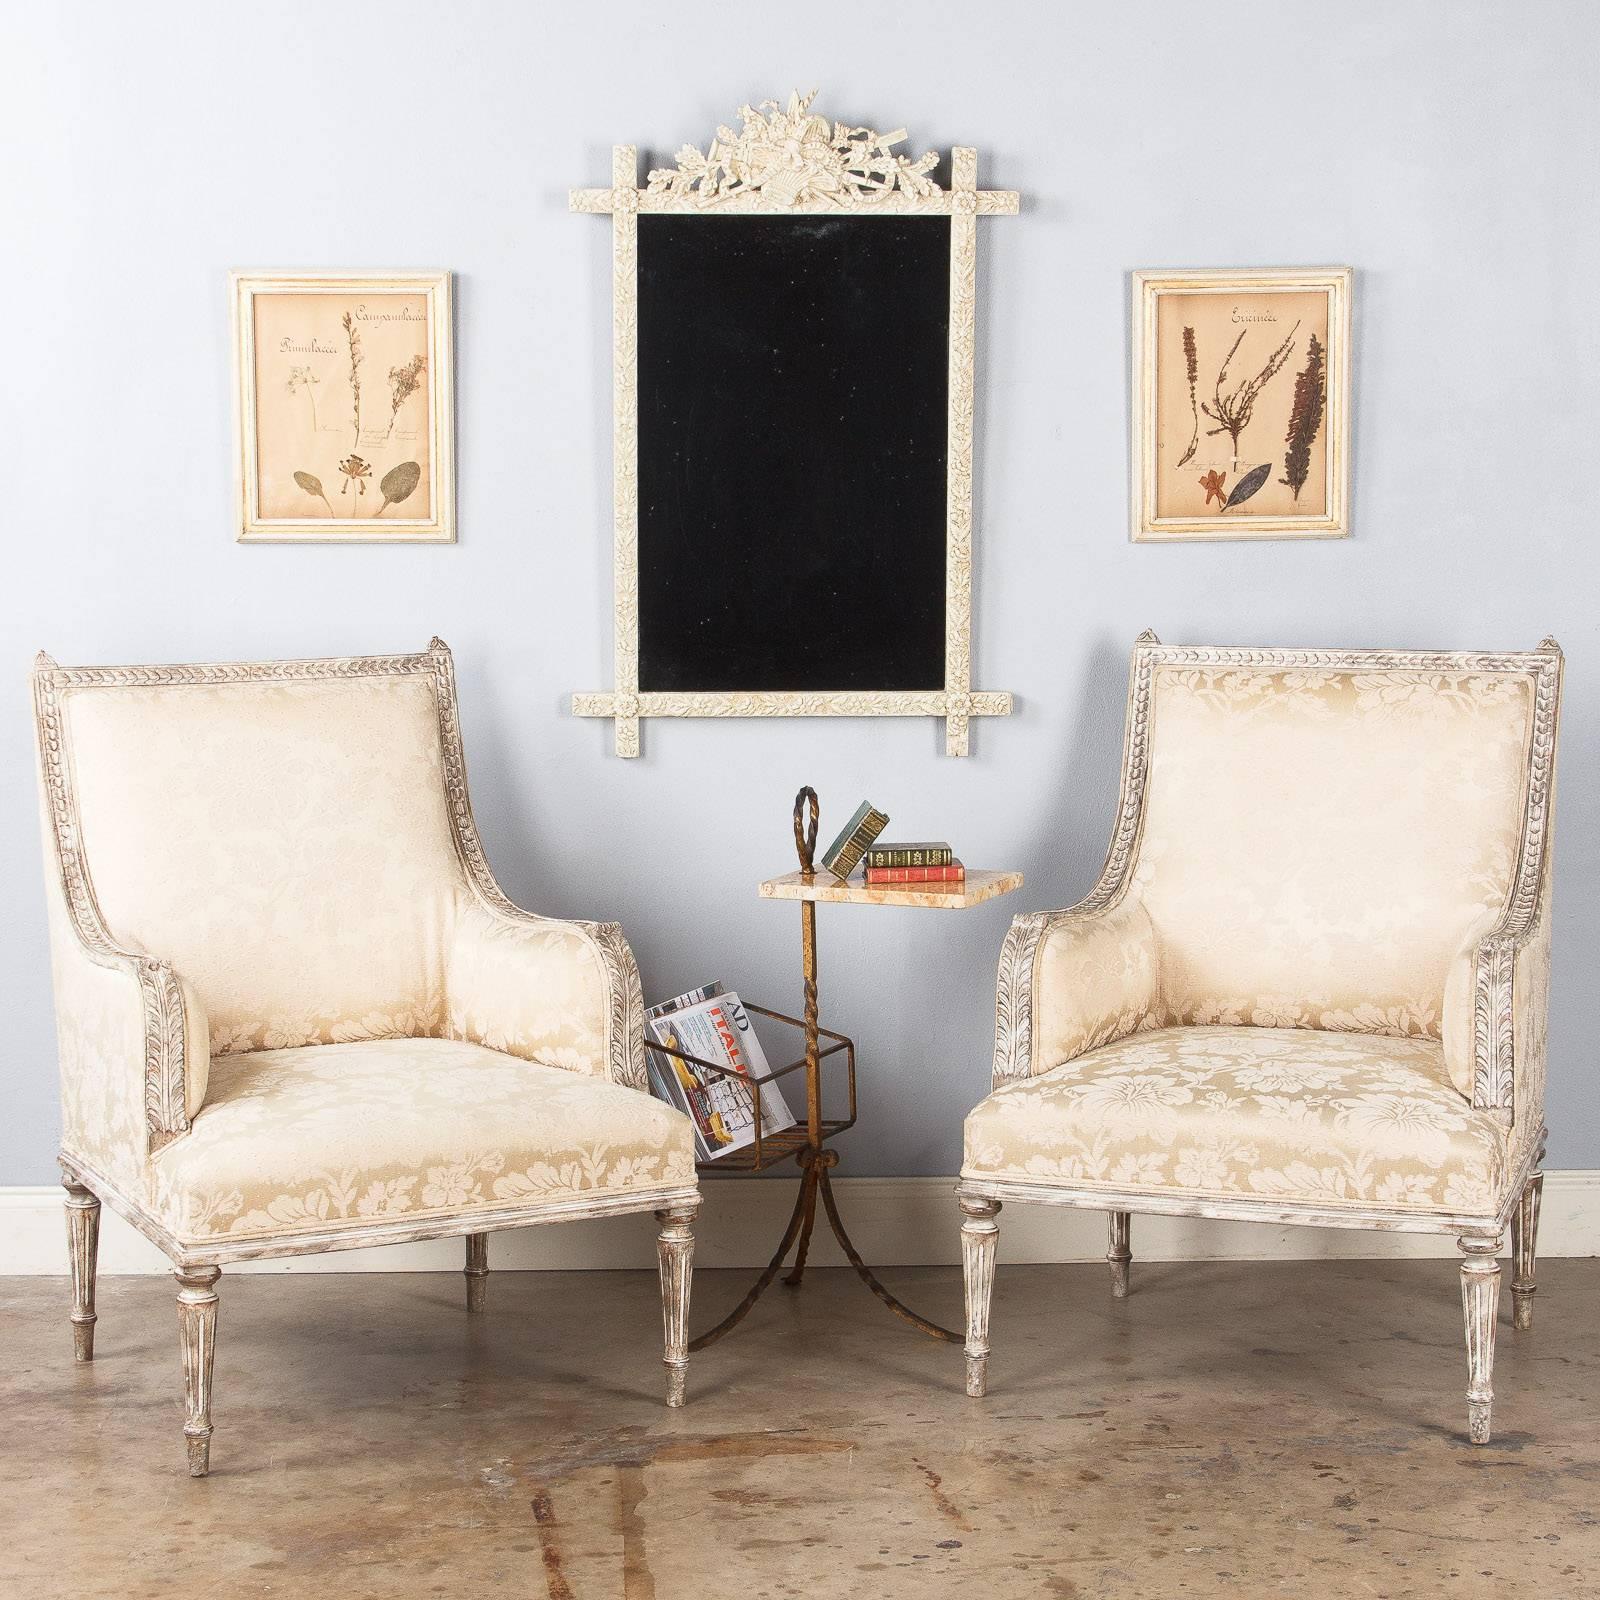 A set of six French pressed botanicals in wooden frames painted in gold and ivory tones. The botanicals are from a private collection and can be dated from the 1930s.